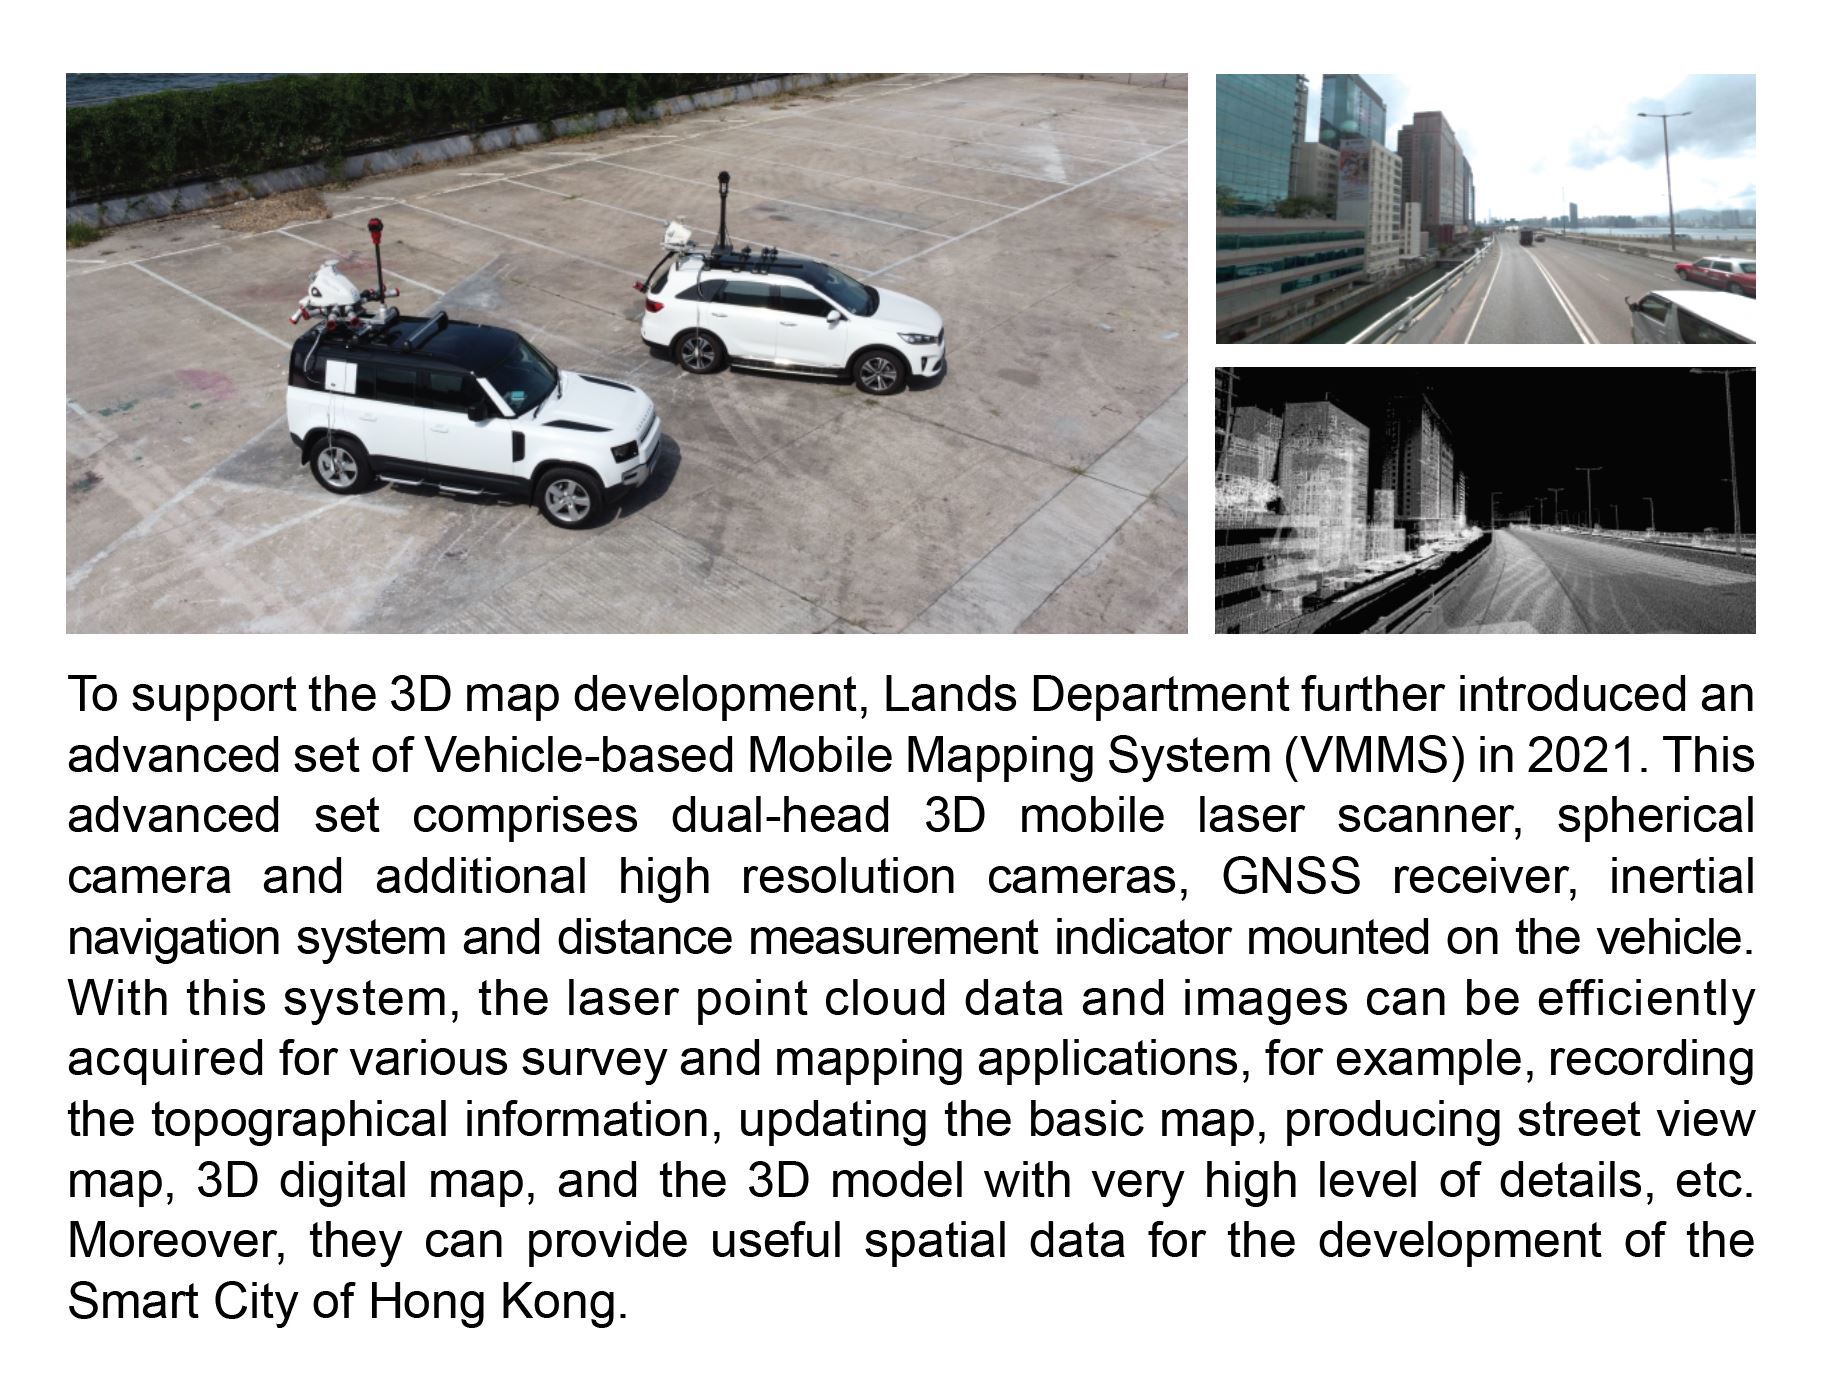 To support the 3D map development, Lands Department further introduced an advanced set of Vehicle-based Mobile Mapping System (VMMS) in 2021. This advanced set comprises dual-head 3D mobile laser scanner, spherical camera and additional high resolution cameras, GNSS receiver, inertial navigation system and distance measurement indicator mounted on the vehicle. With this system, the laser point cloud data and images can be efficiently acquired for various survey and mapping applications, for example, recording the topographical information, updating the basic map, producing street view map, 3D digital map, and the 3D model with very high level of details, etc. Moreover, they can provide useful spatial data for the development of the Smart City of Hong Kong.